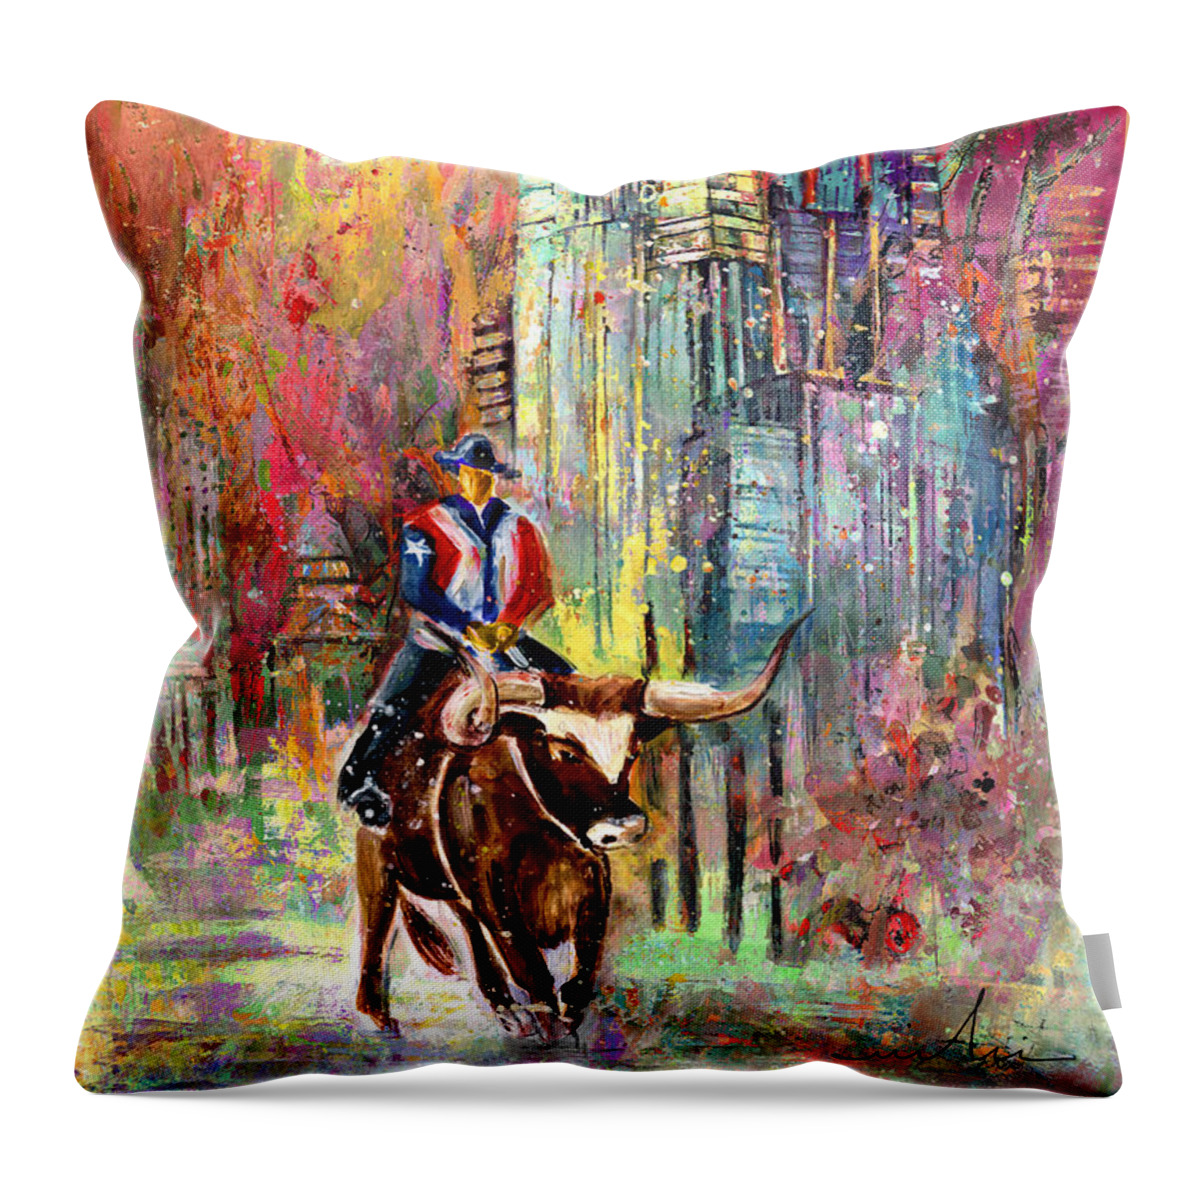 Travel Throw Pillow featuring the painting A CowBoy In Austin by Miki De Goodaboom